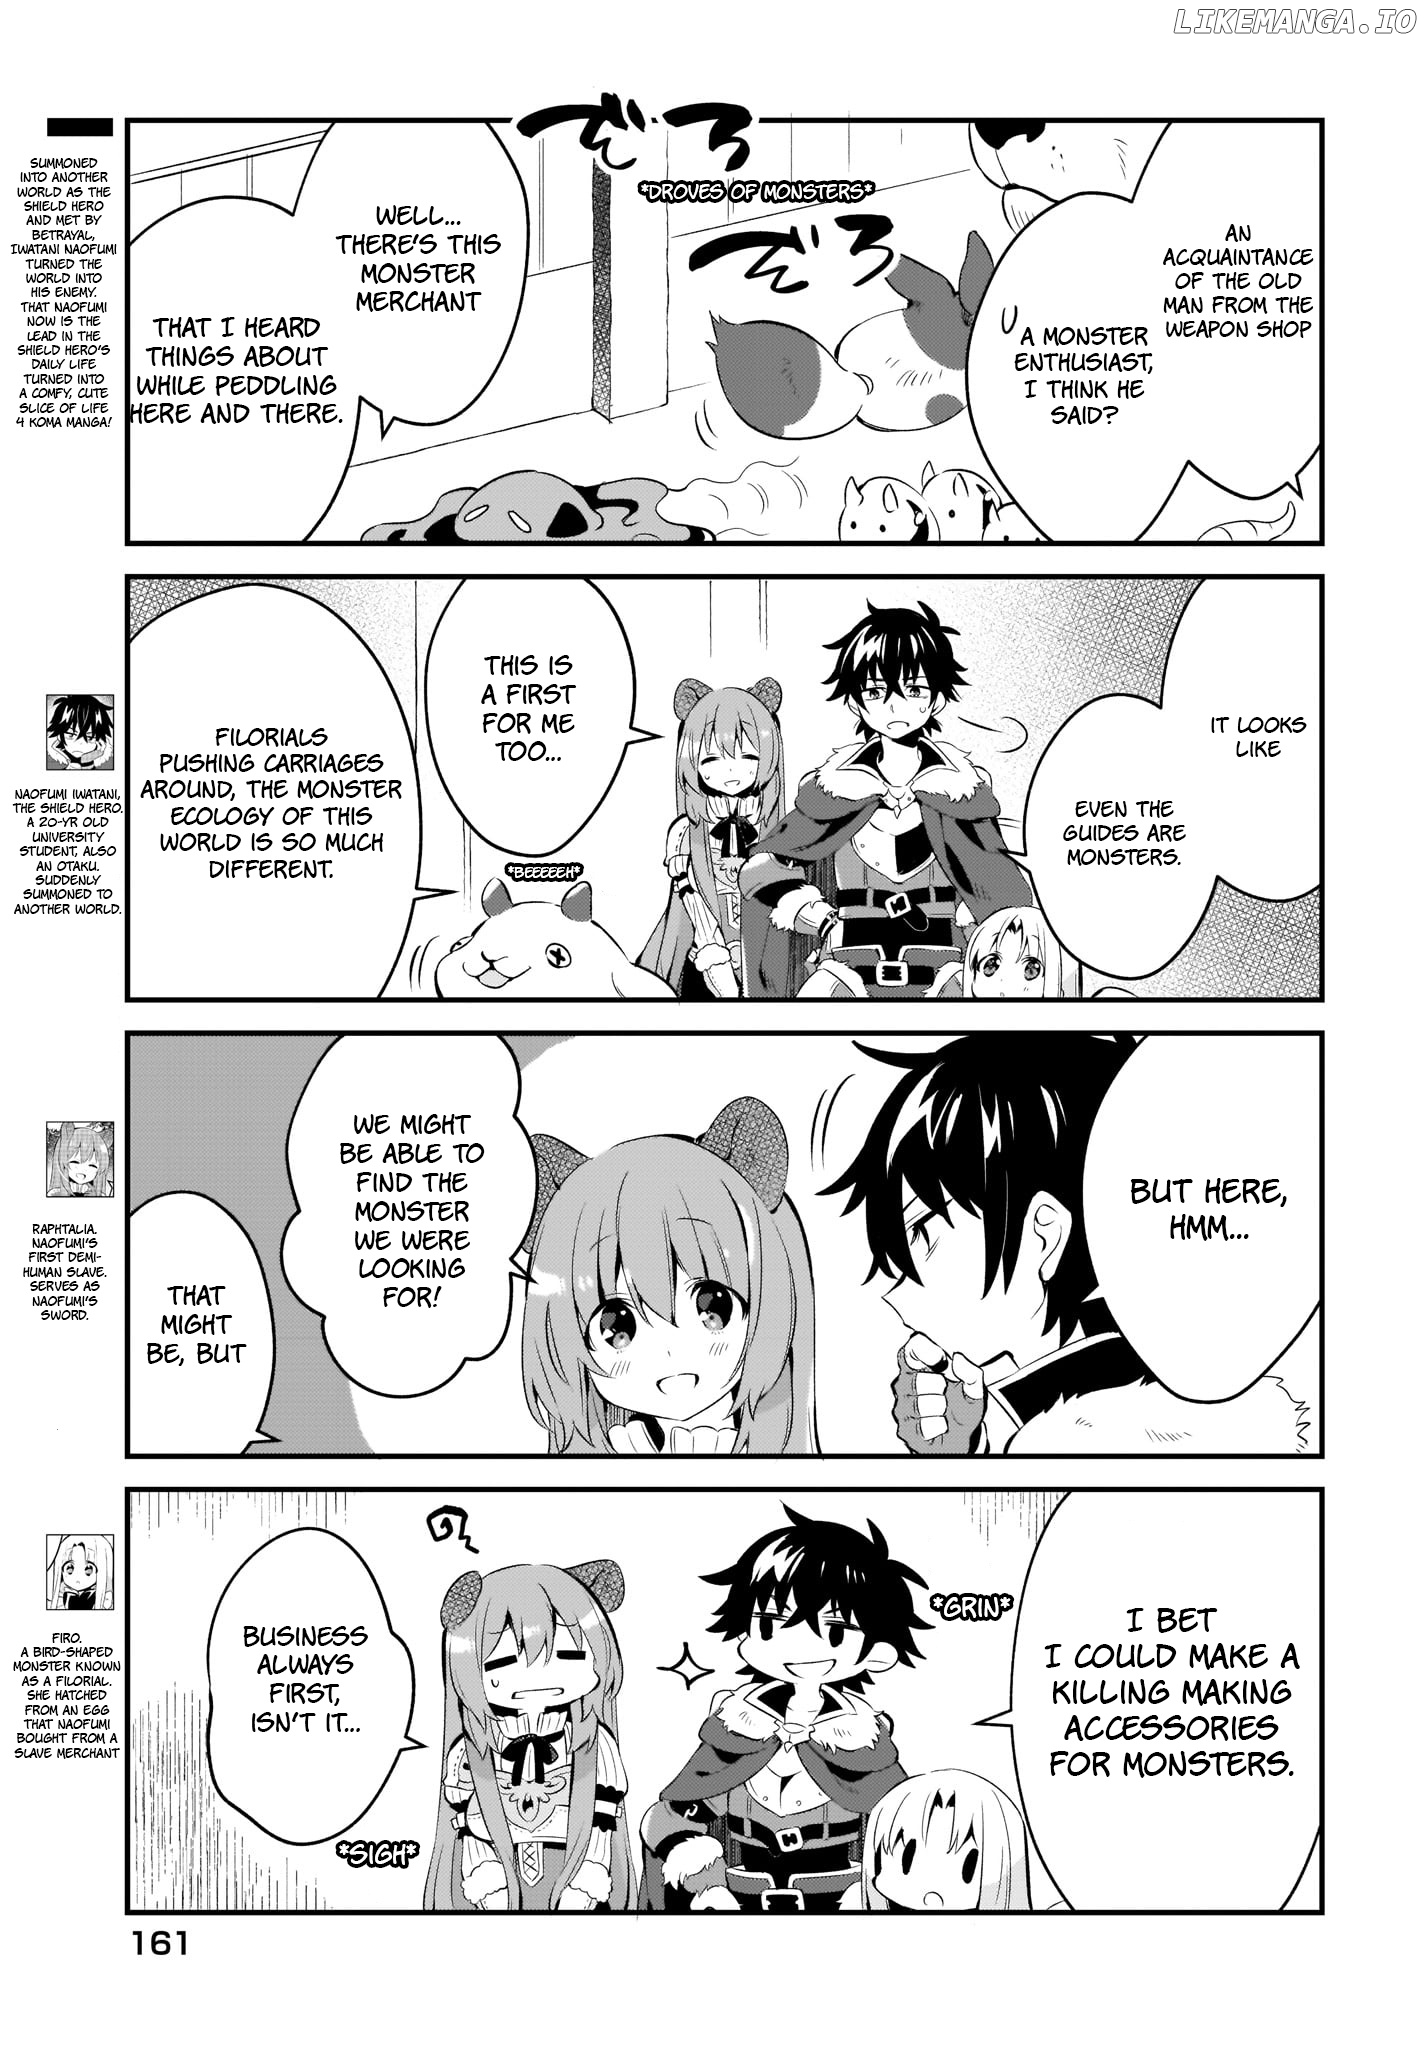 A Day In The Life Of The Shield Hero chapter 3 - page 3